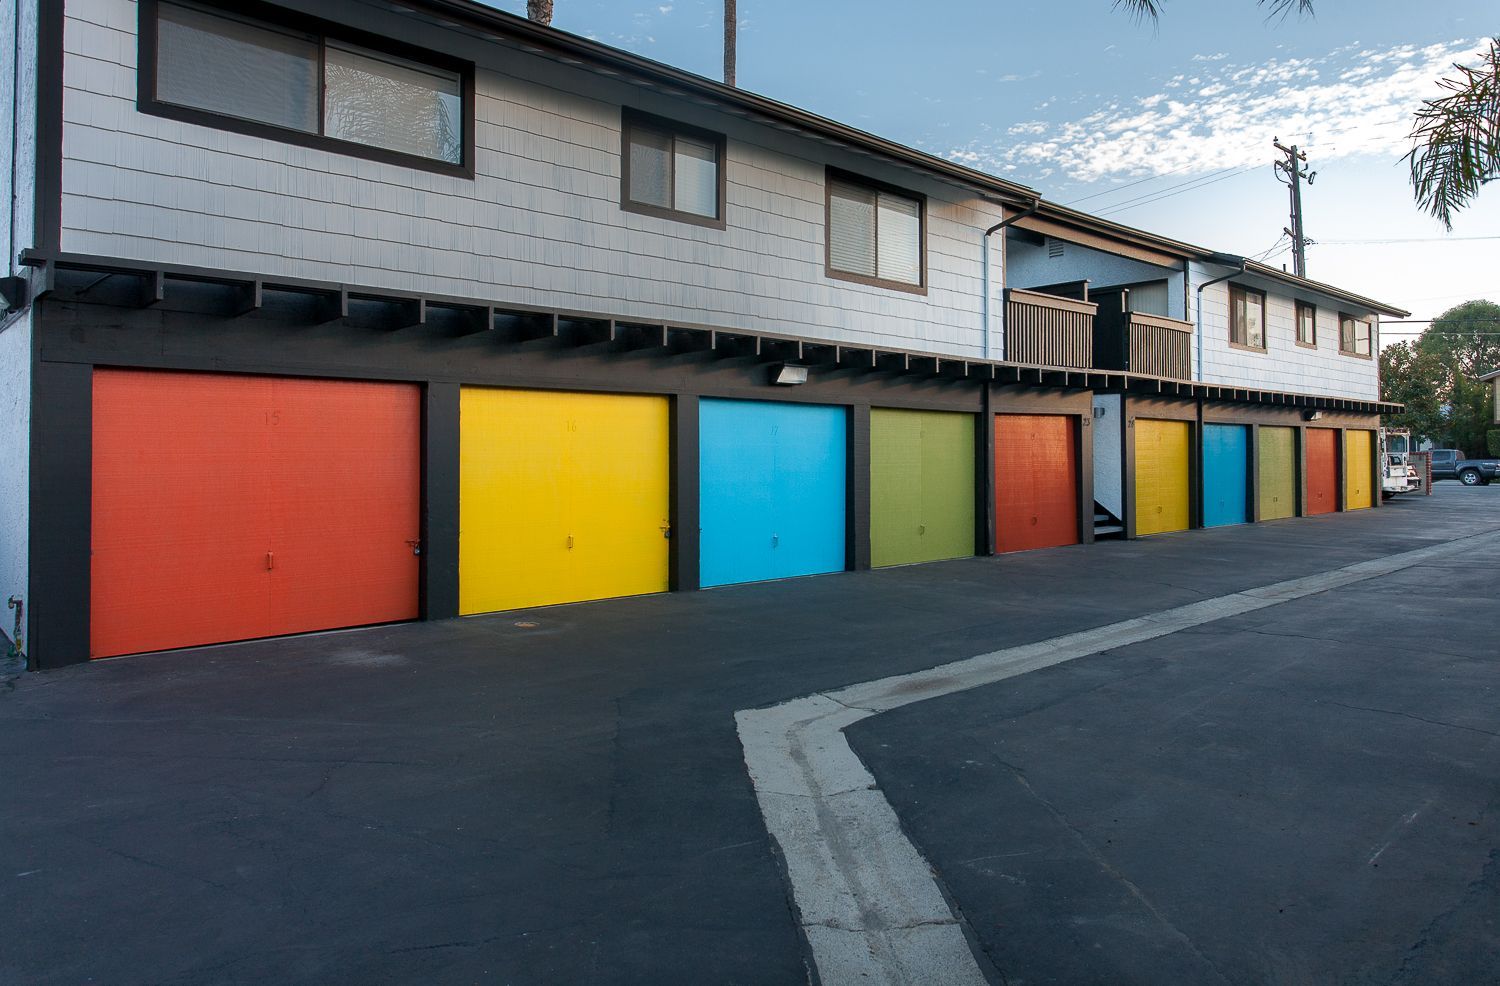 Sliding Photo Gallery Displaying Community Amenities - Garages with rainbow colors